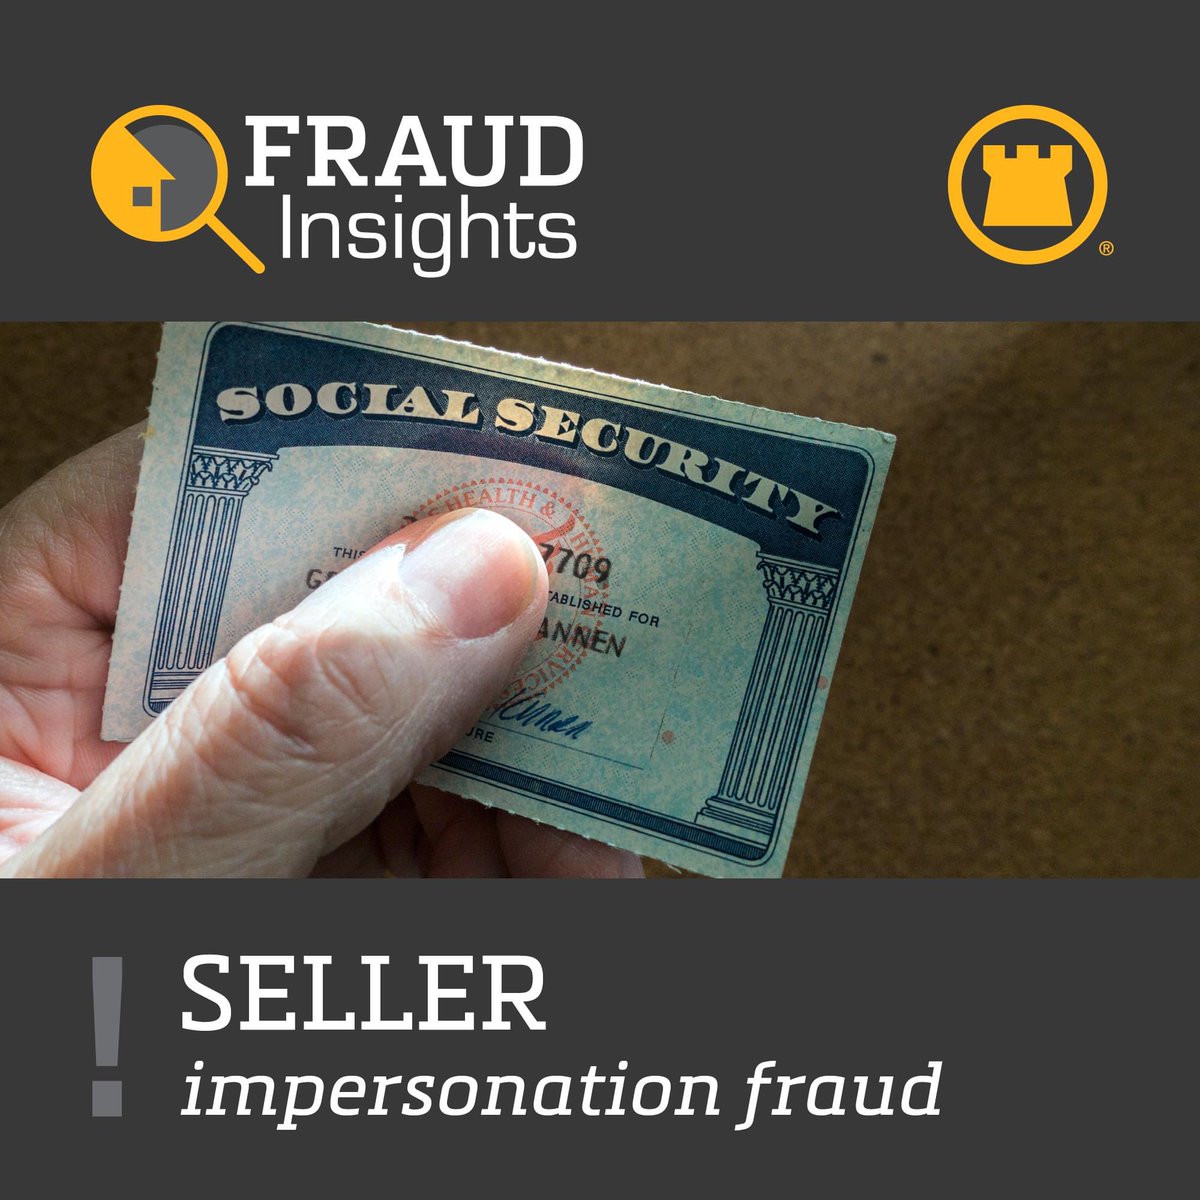 Seller impersonation fraud involves individuals impersonating property owners to illegally sell commercial or residential property. Click the link. Our title experts are working to safeguard consumers from this regrettable scam
🔗 bit.ly/450wfnJ